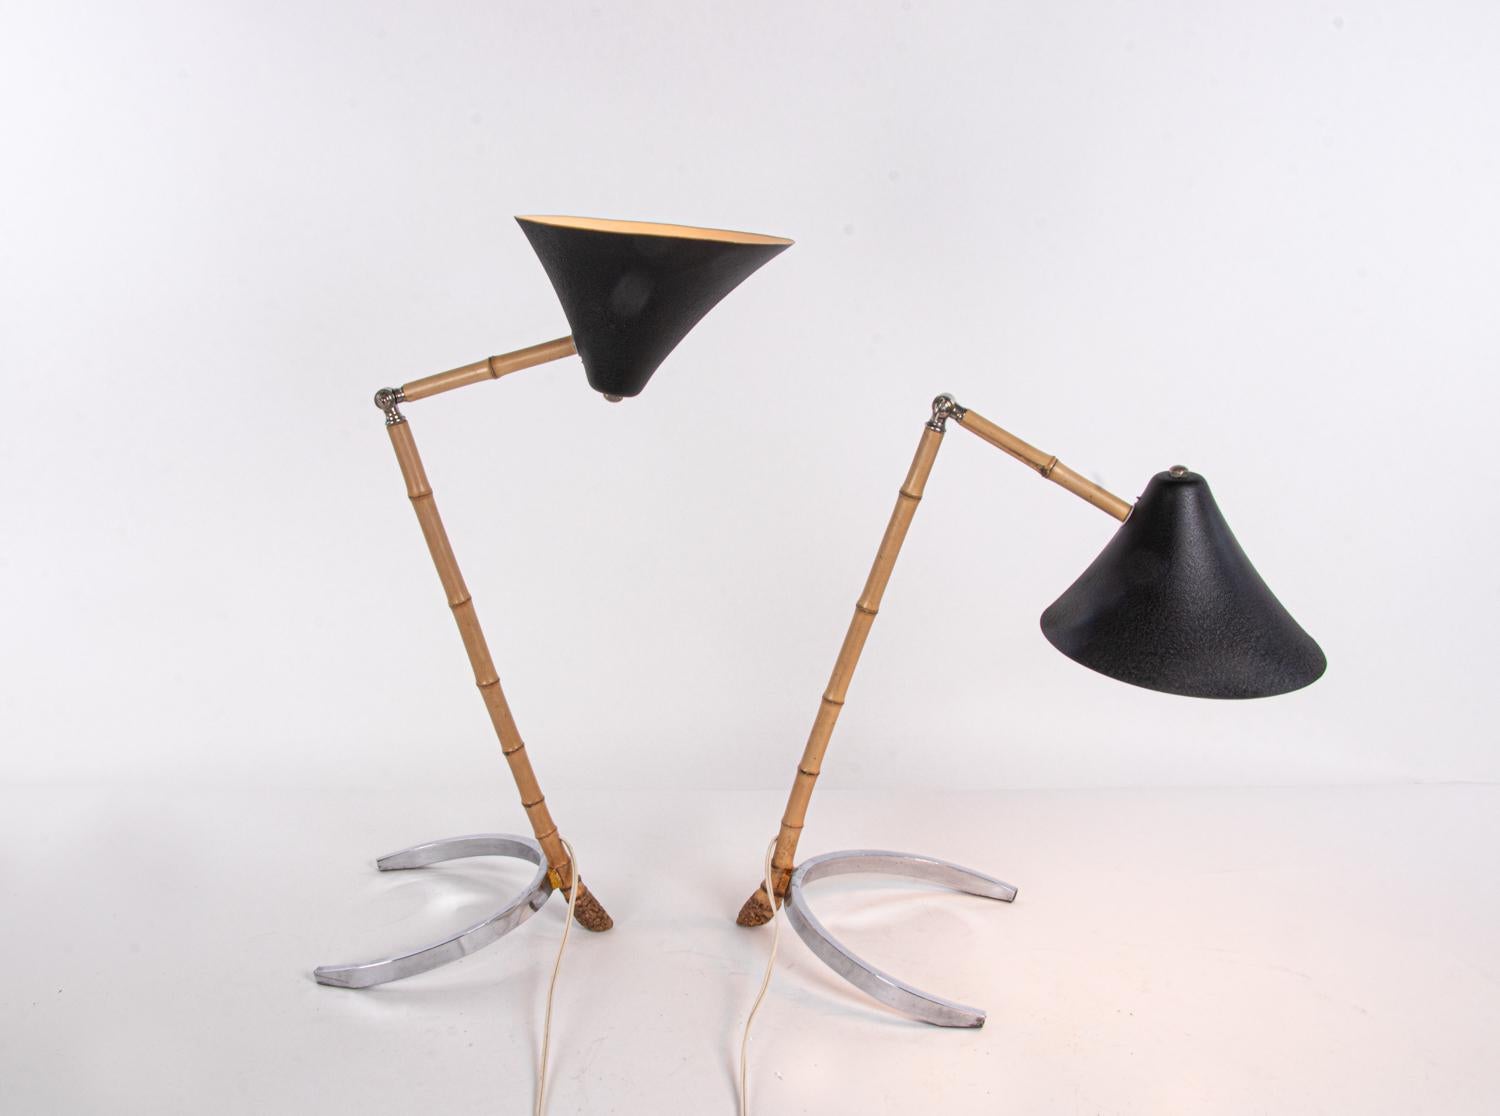 Austrian Pair of Mid Century Articulated Bamboo Table Lamps, Vienna, 1950s For Sale